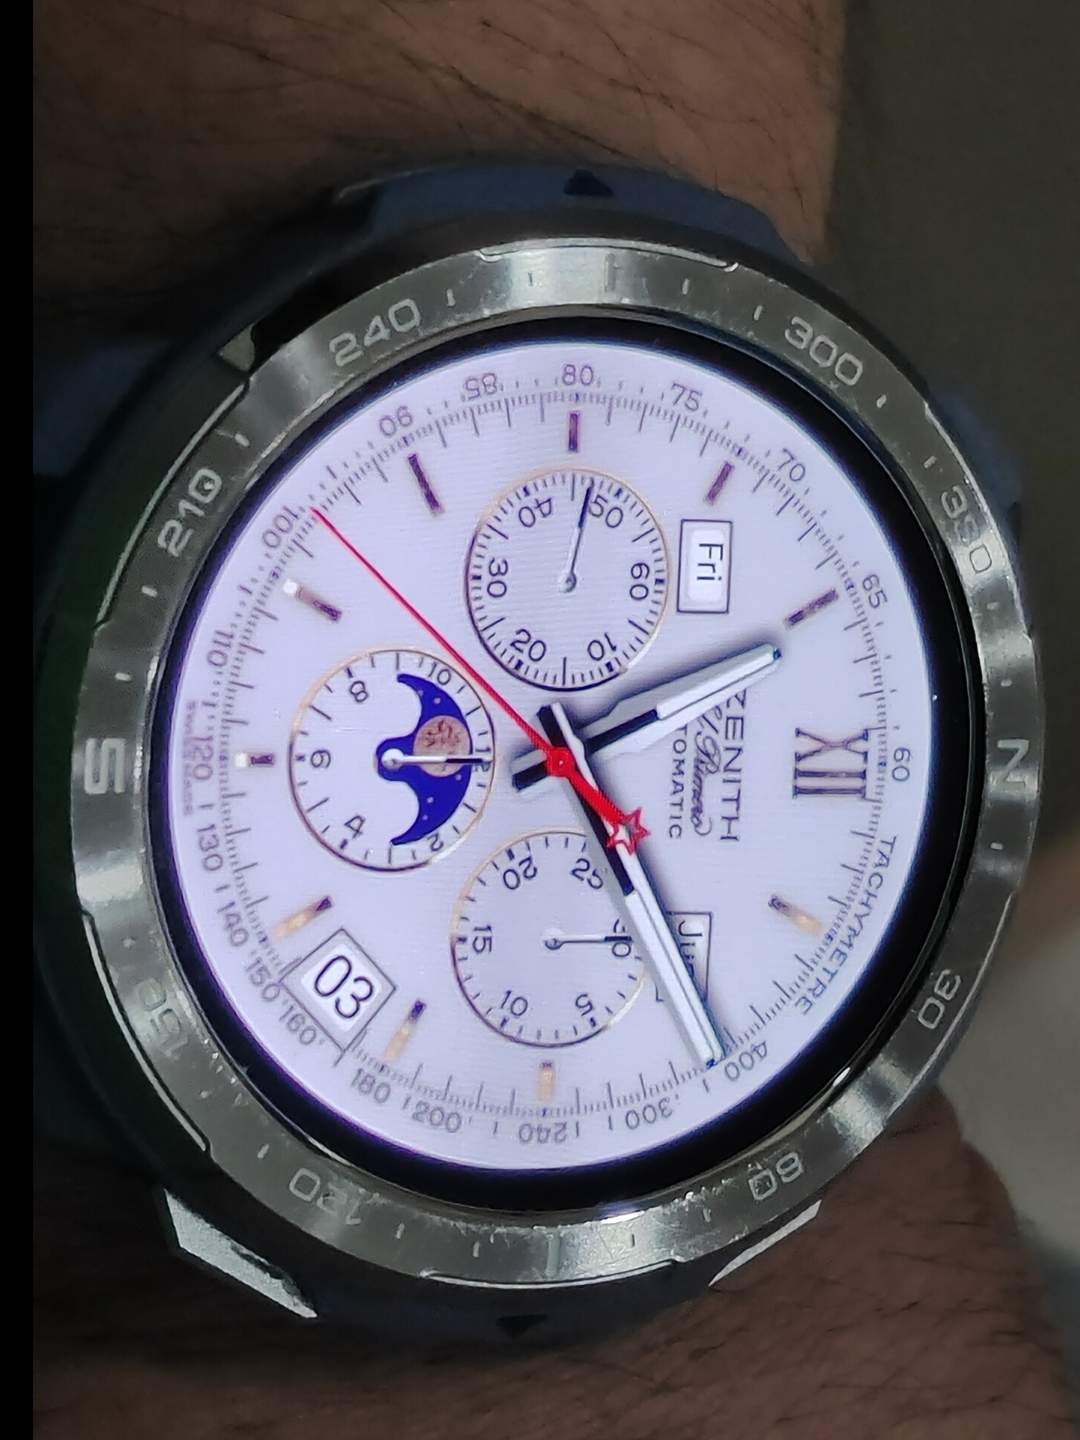 Zenith ultra realistic white hybrid watchface with Moon phase